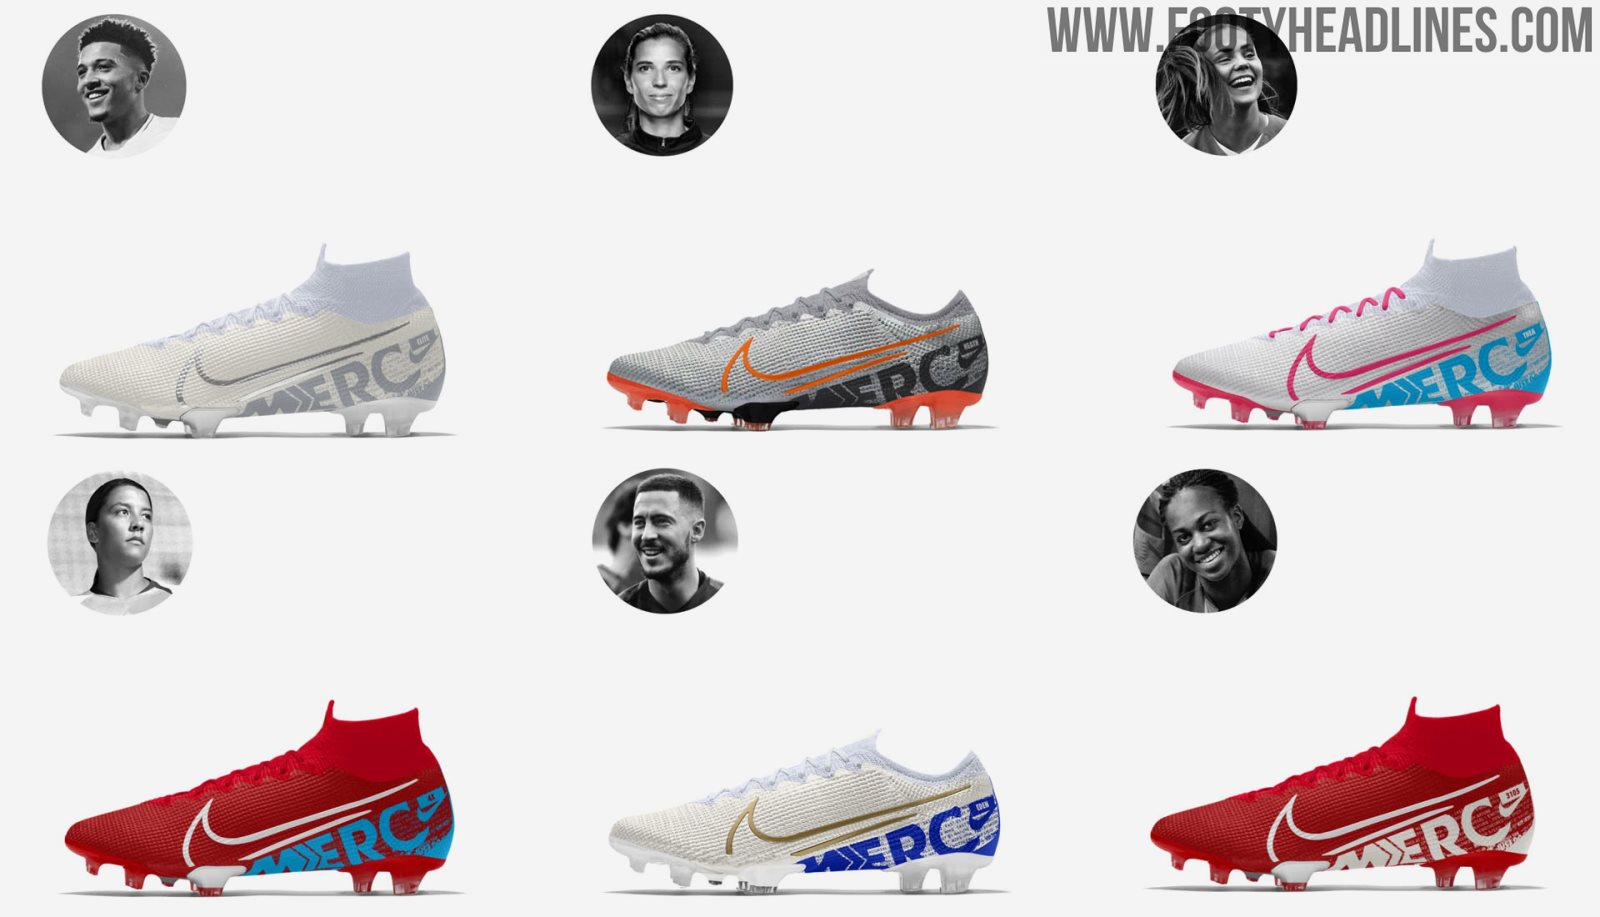 customize your own cleats